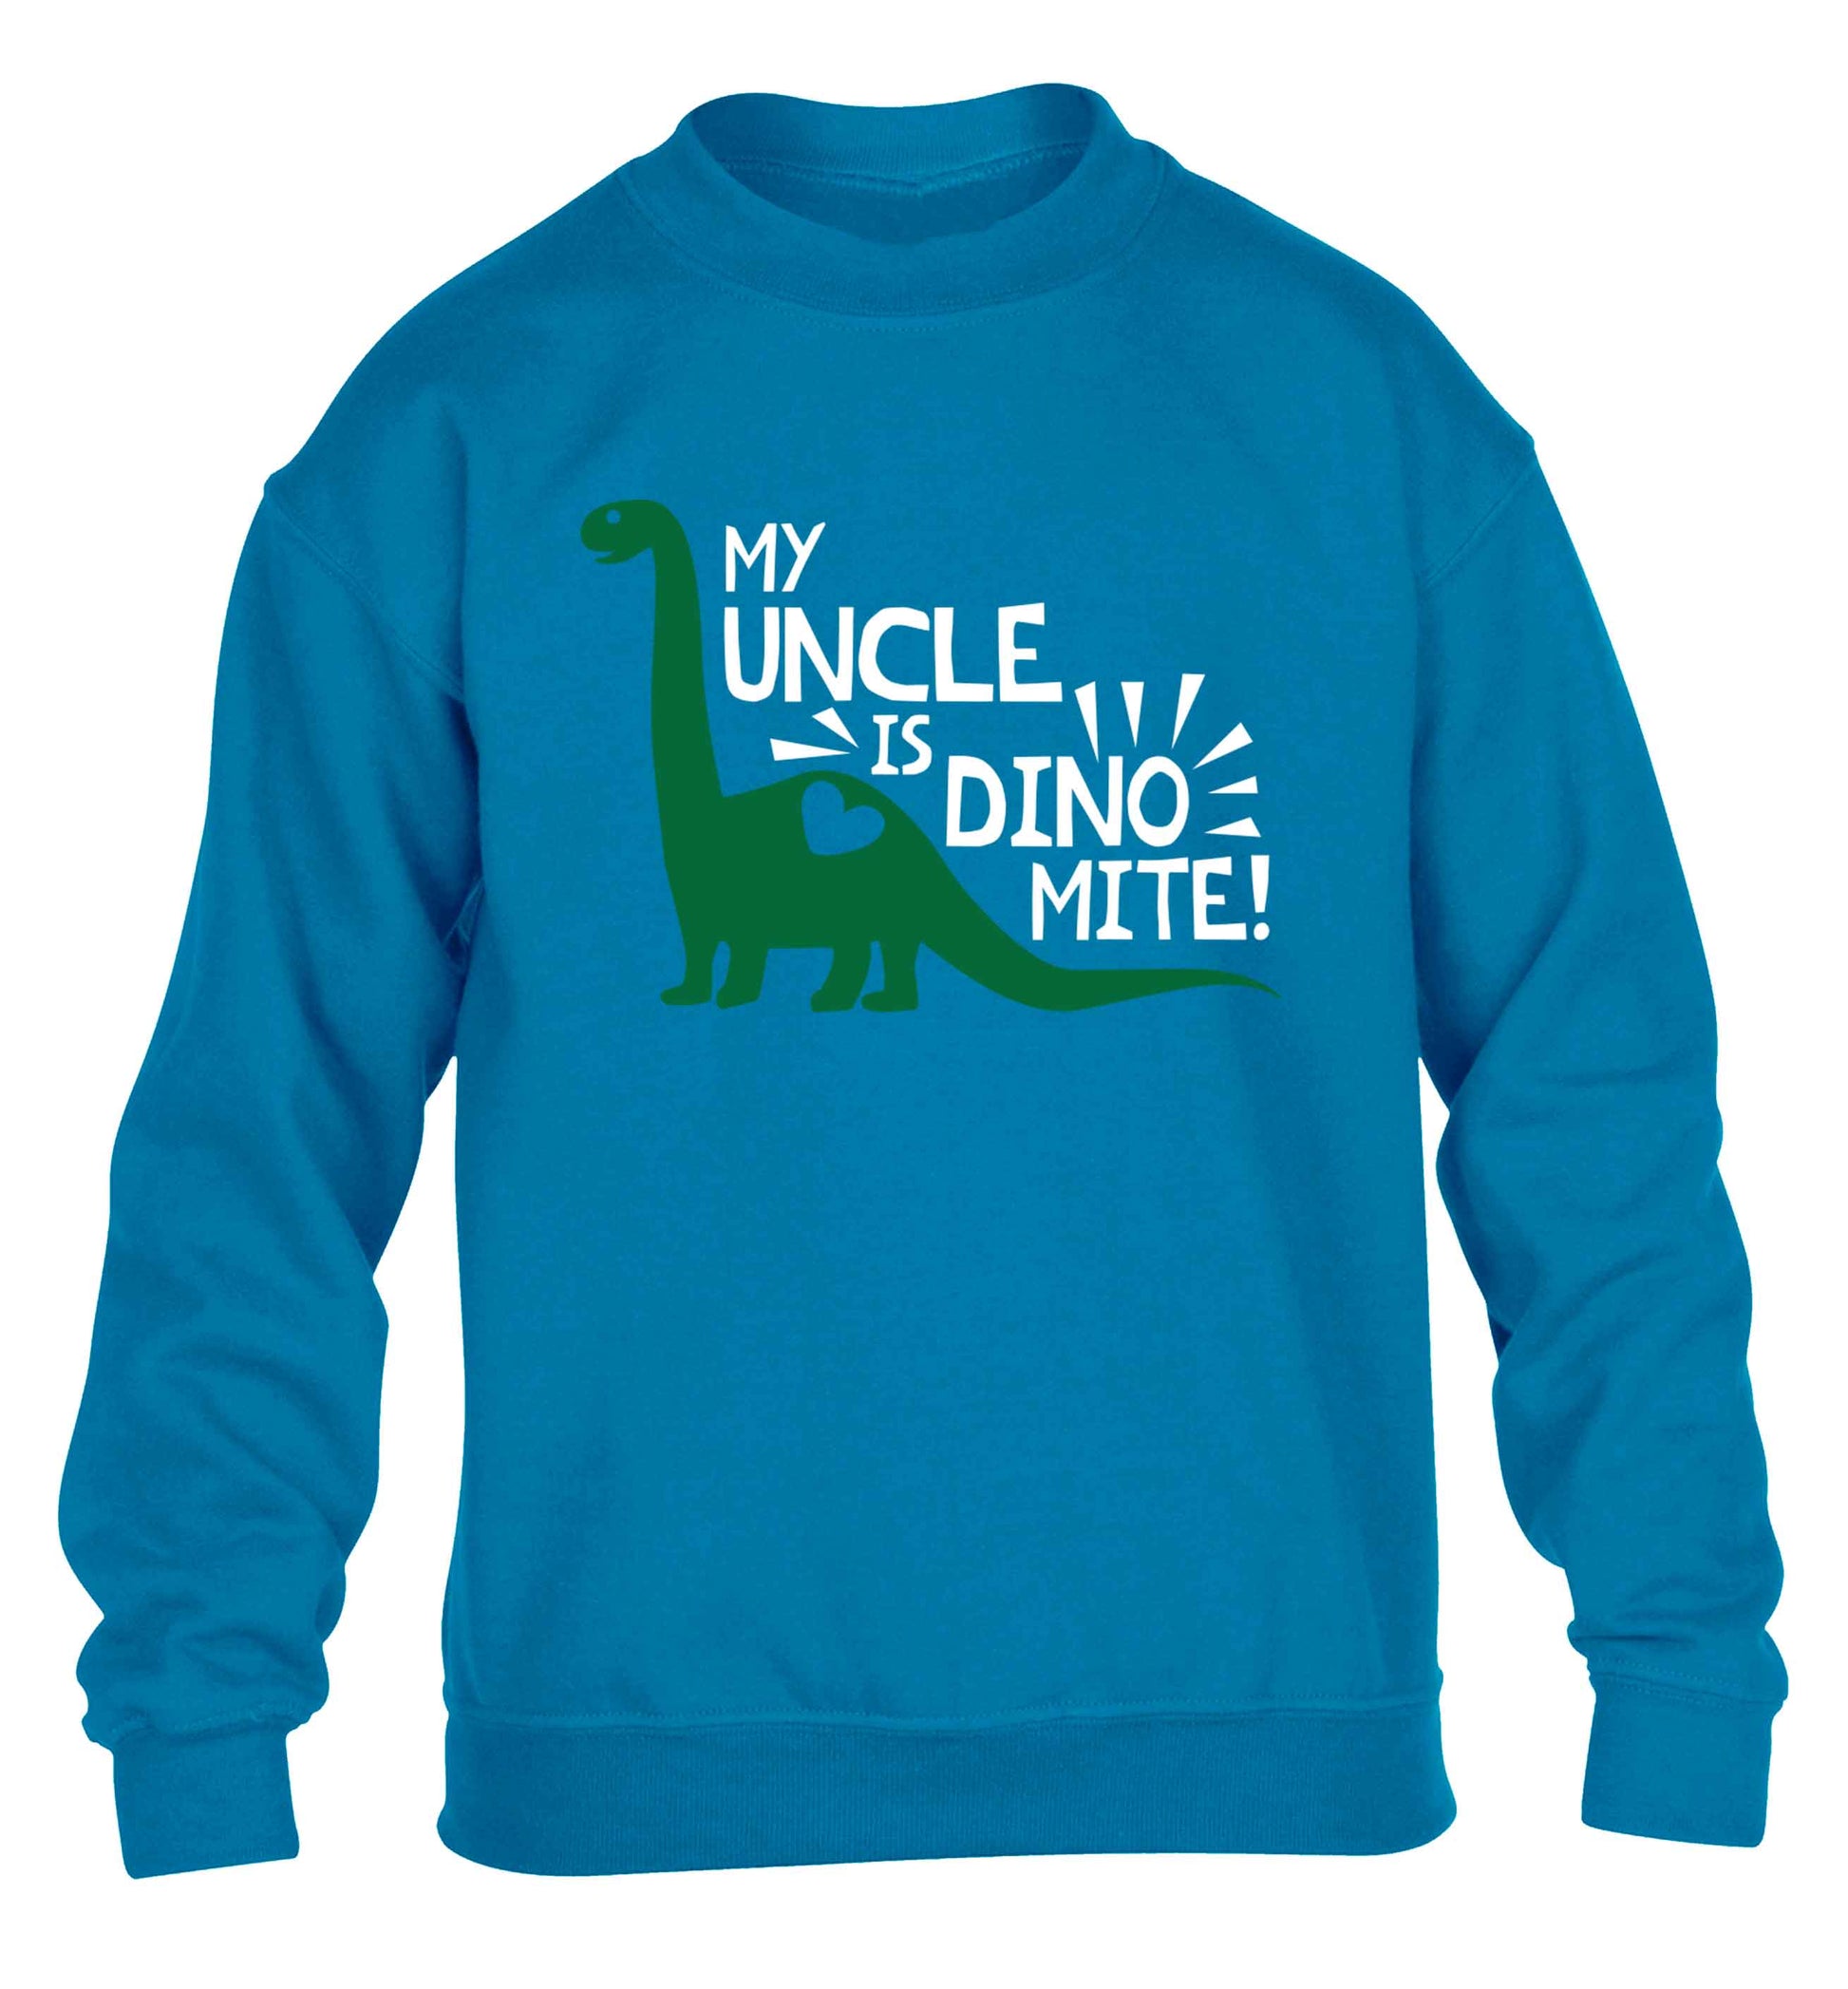 My uncle is dinomite! children's blue sweater 12-13 Years